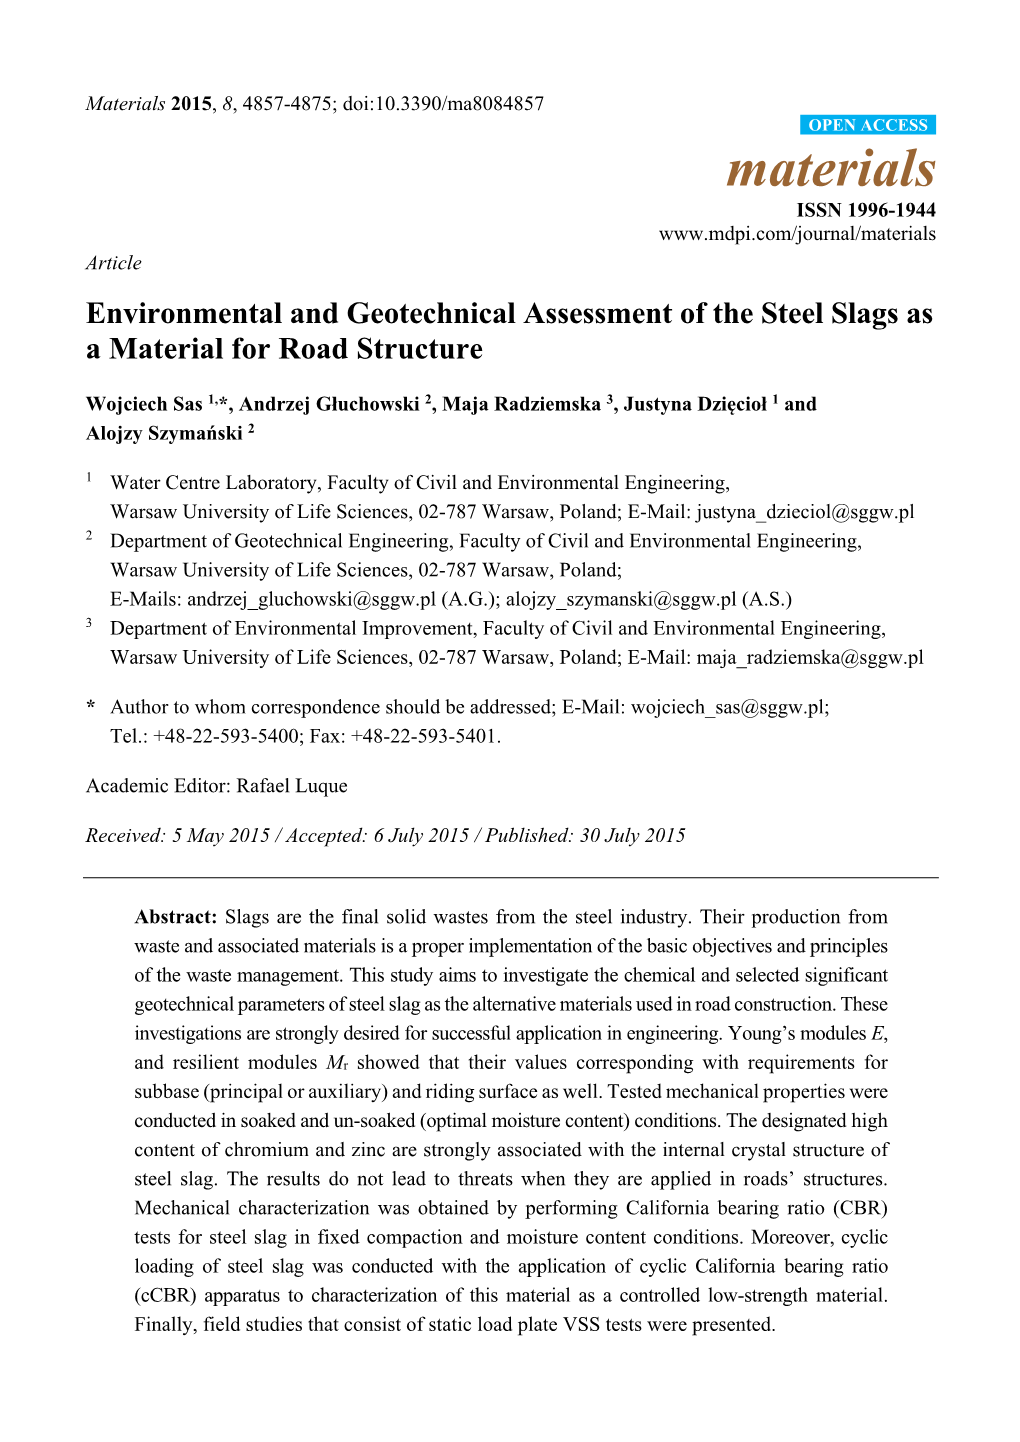 Environmental and Geotechnical Assessment of the Steel Slags As a Material for Road Structure